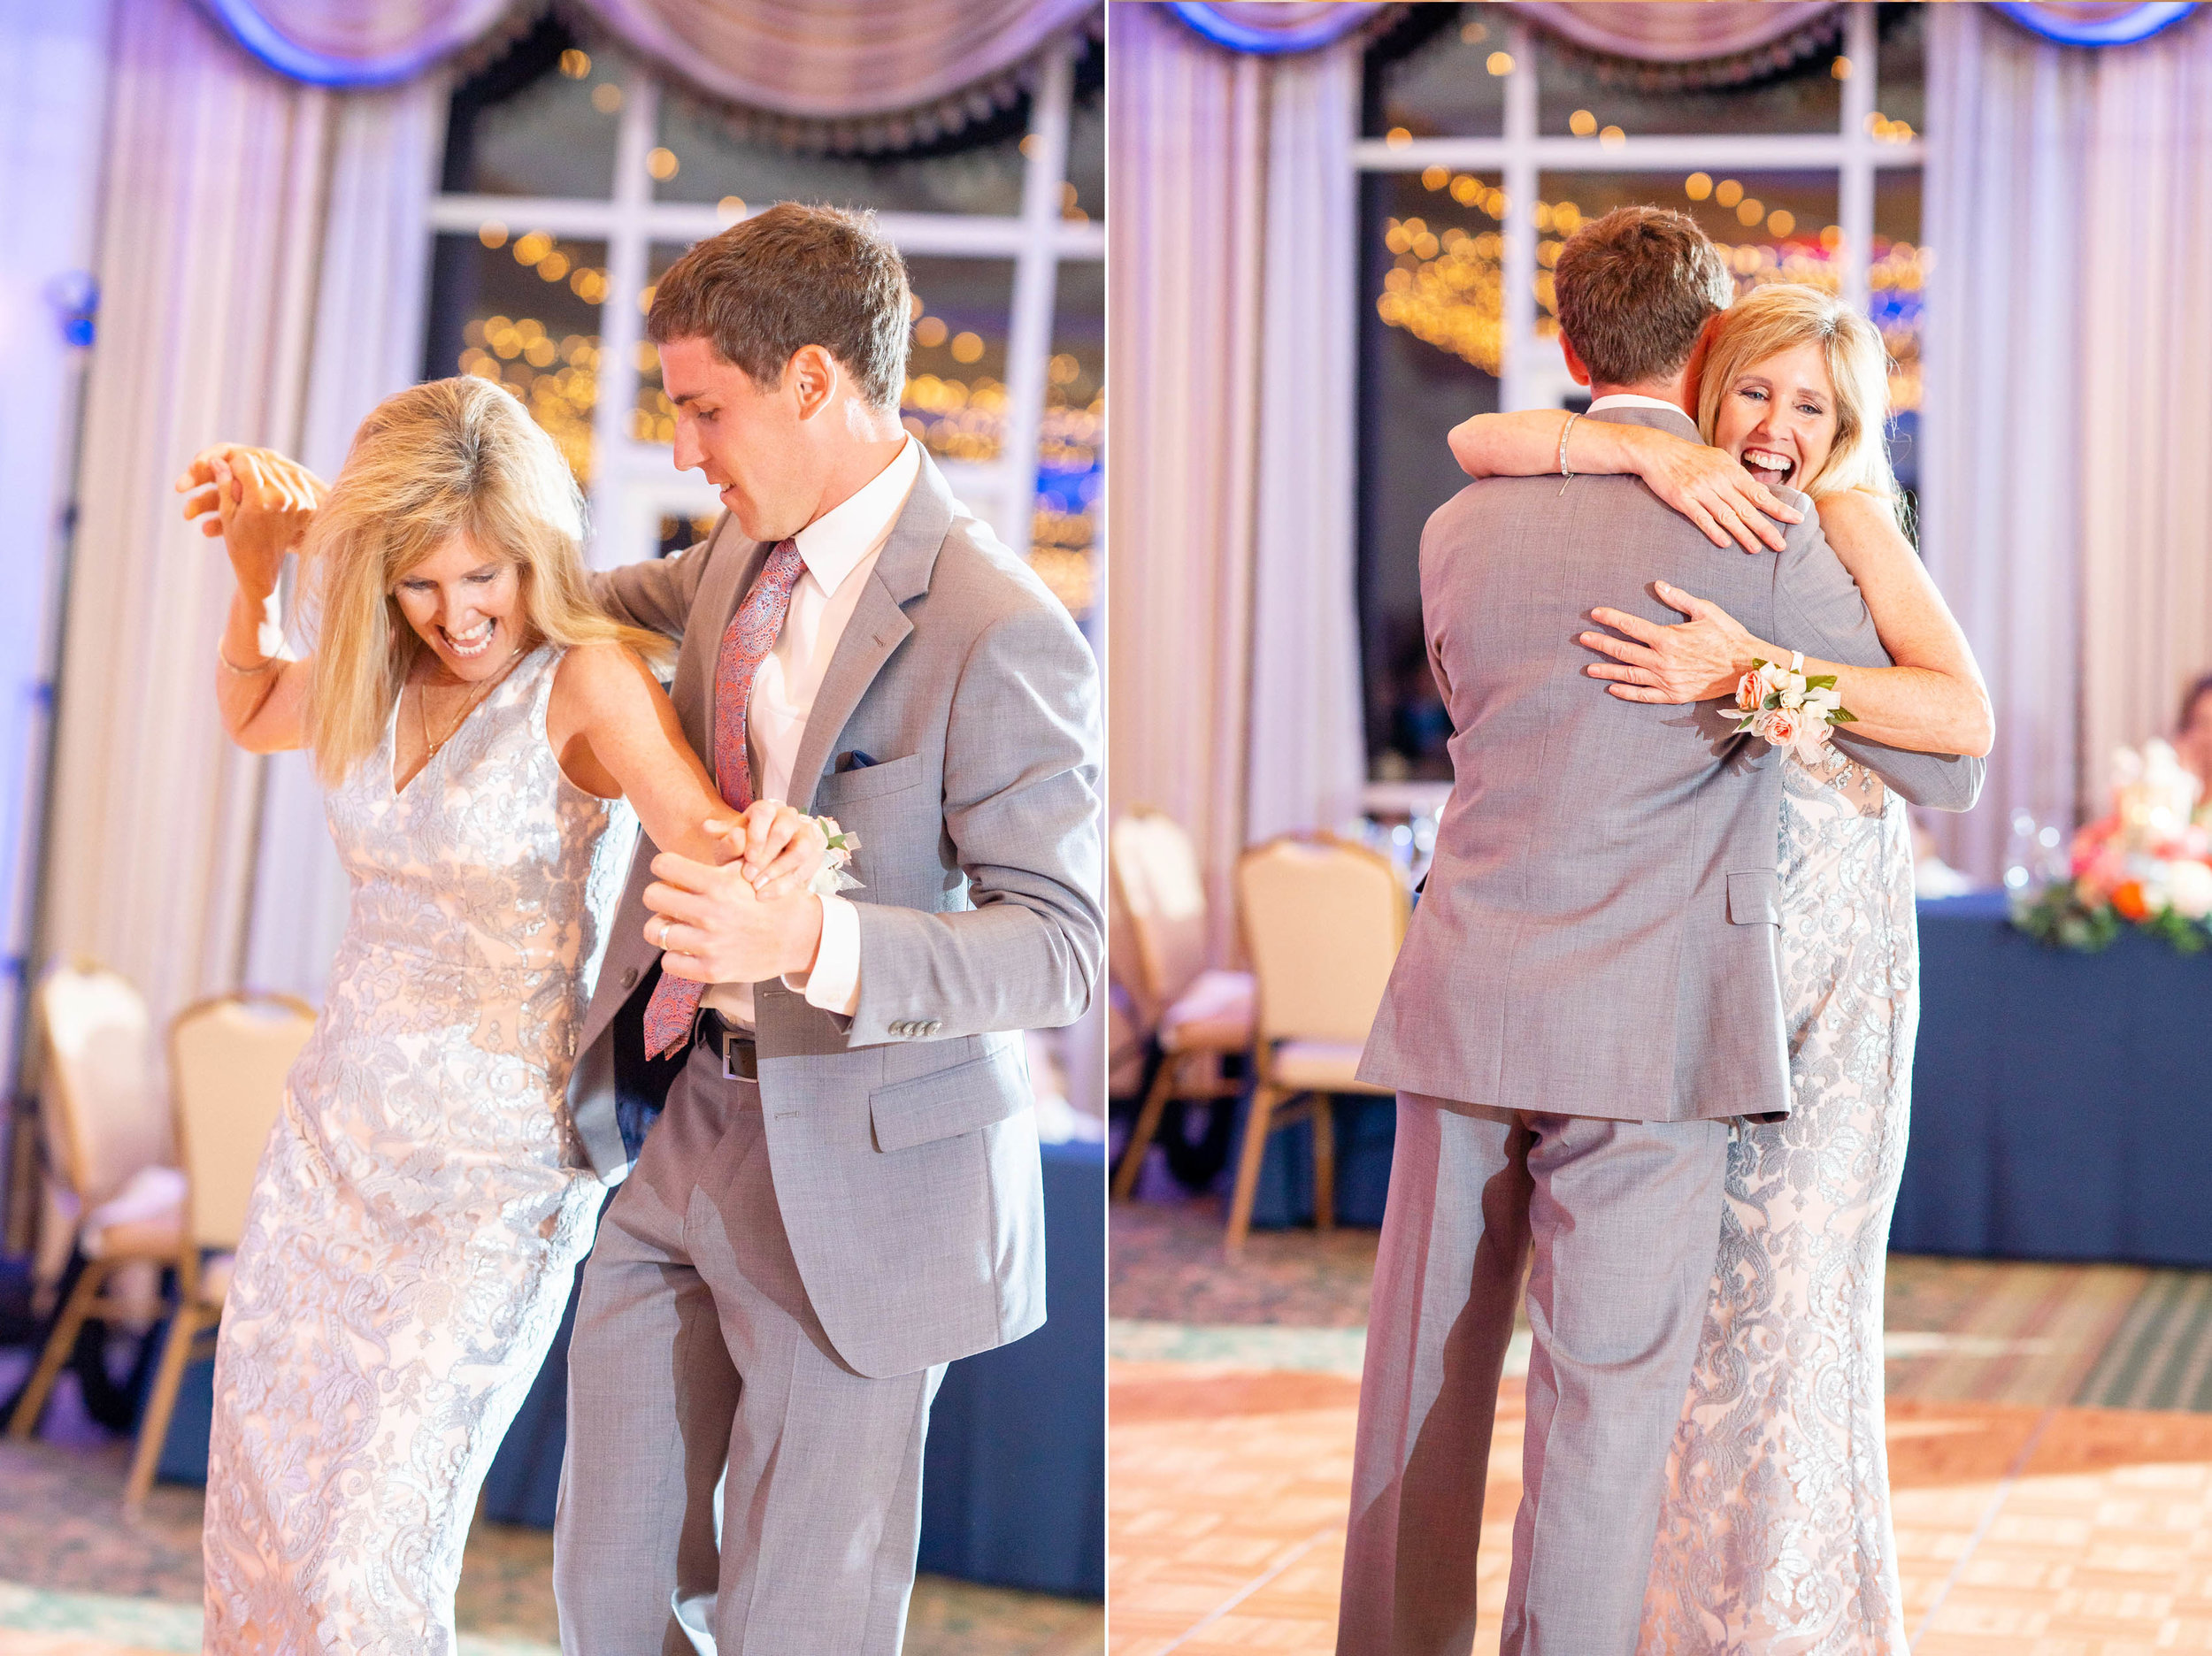 Mother son dance during wedding reception at Rehoboth Beach Country Club